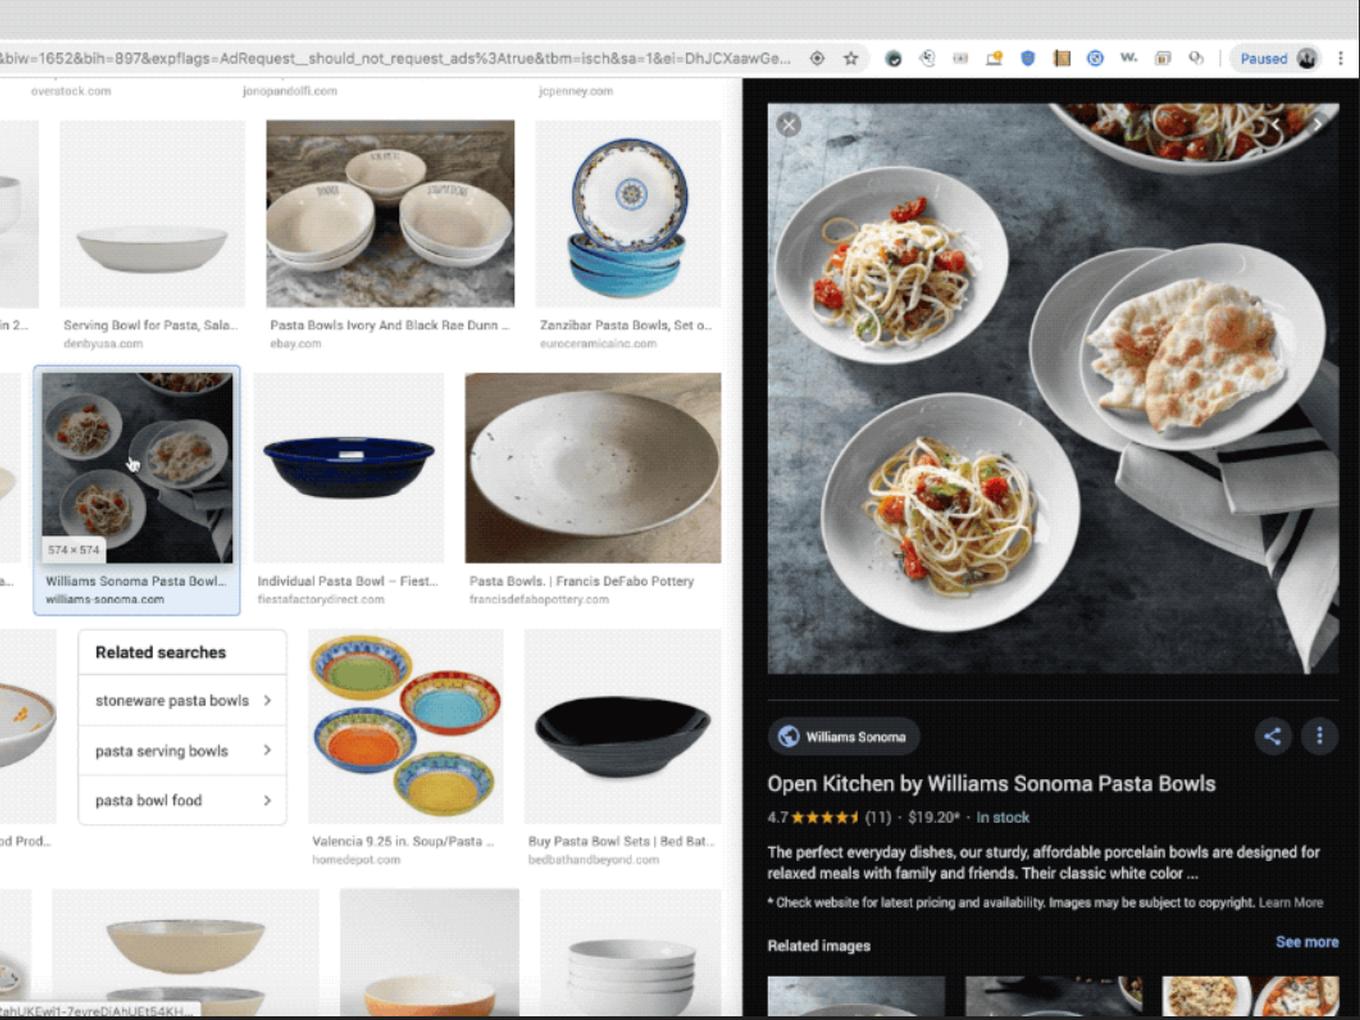 Google Revamps Image Search To Challenge Amazon In Online Shopping